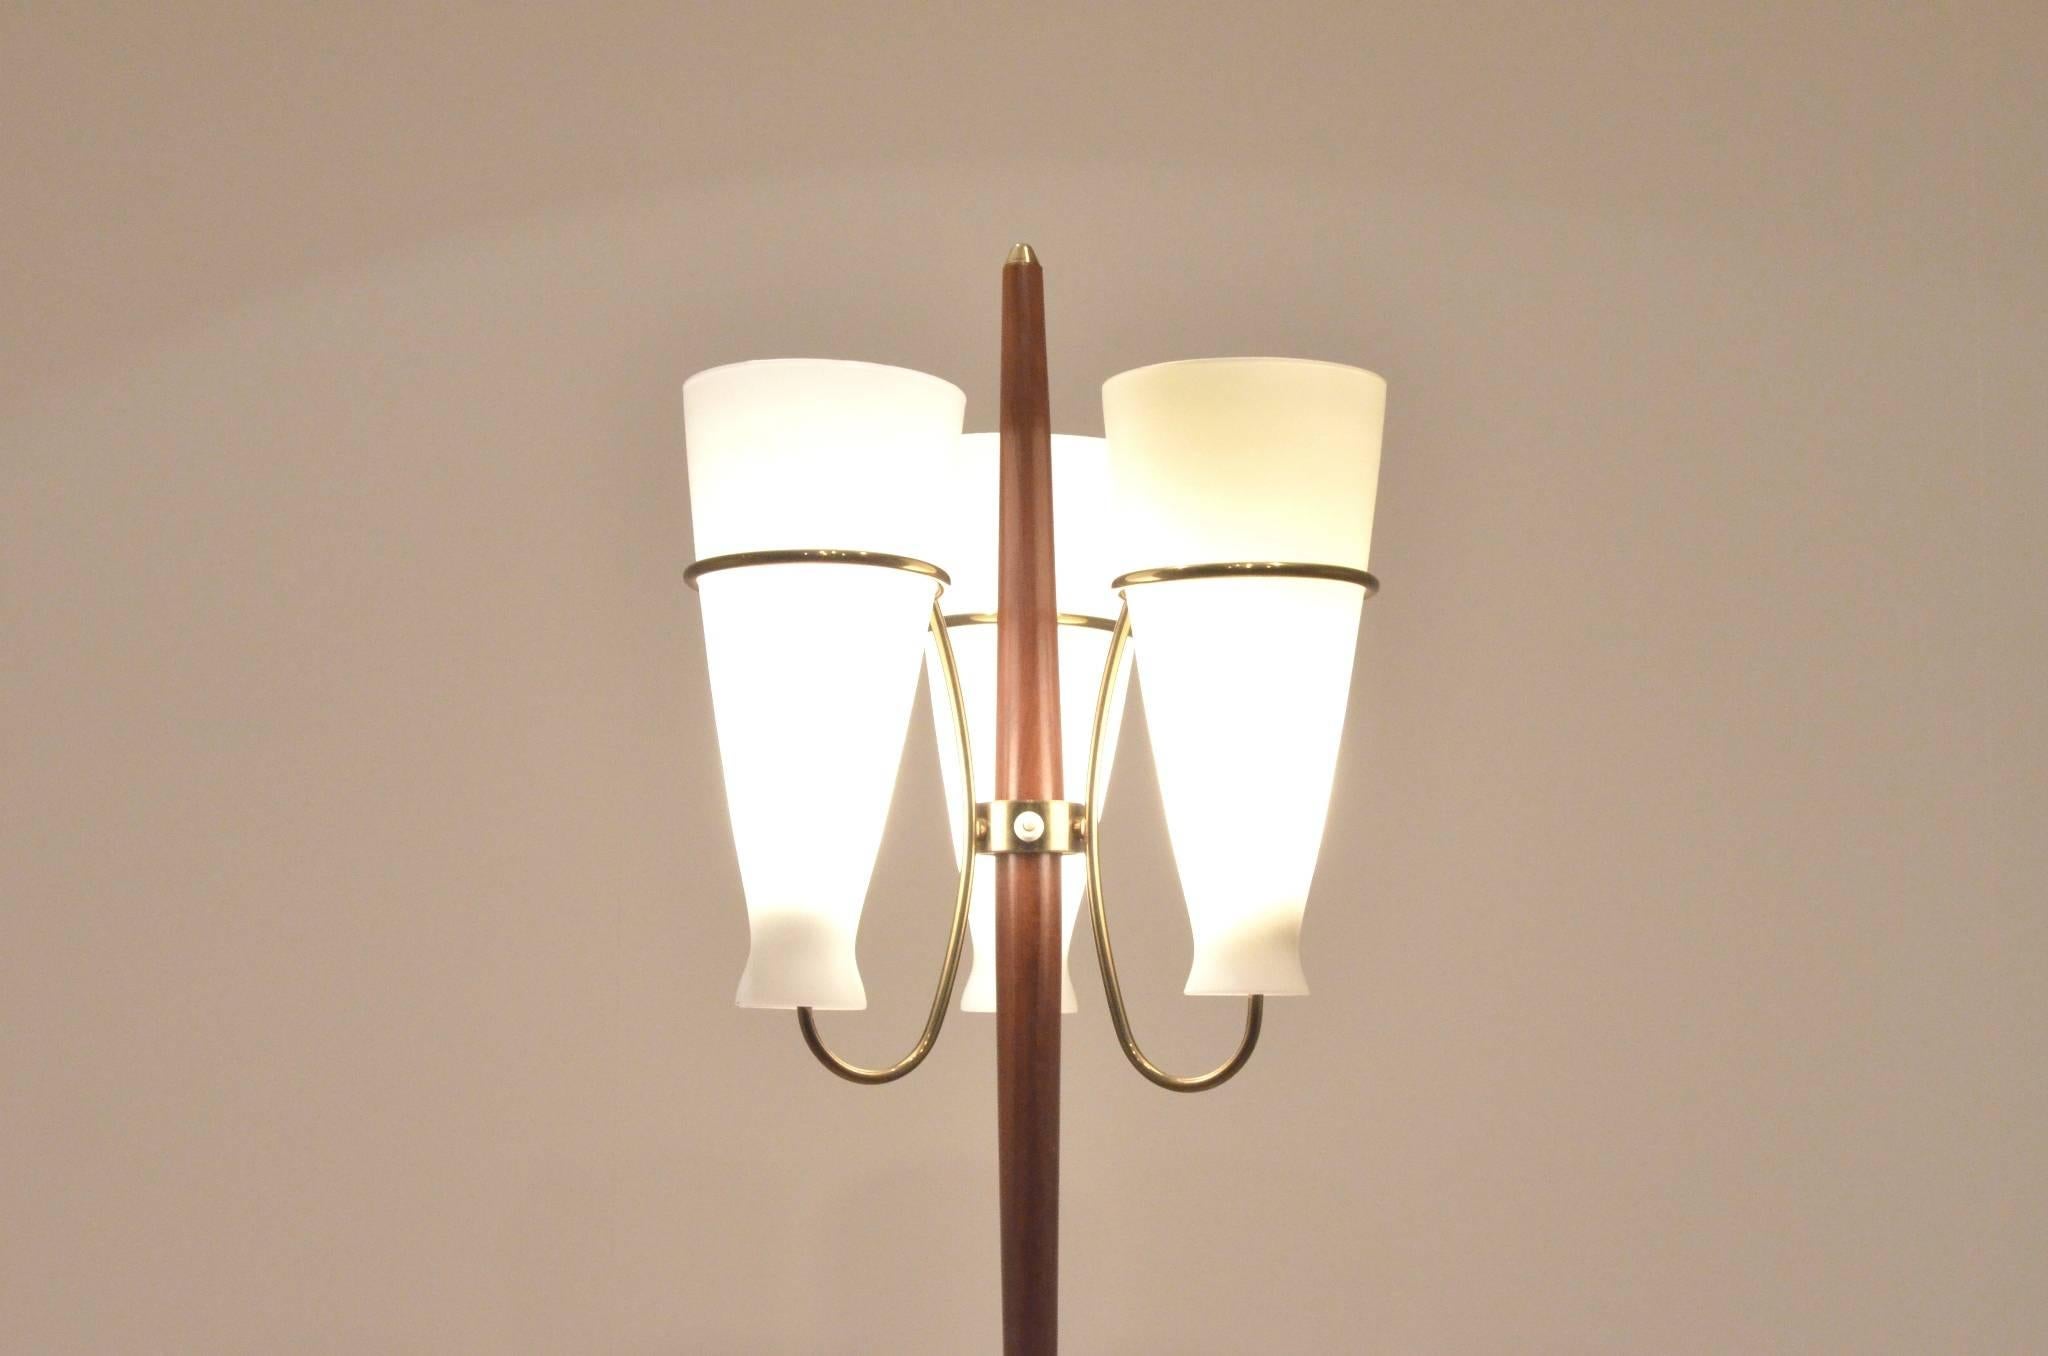 Nice Mid-Century Italian floor lamp, brass elements matched with opalescent glass diffusers and central teak wood rod.